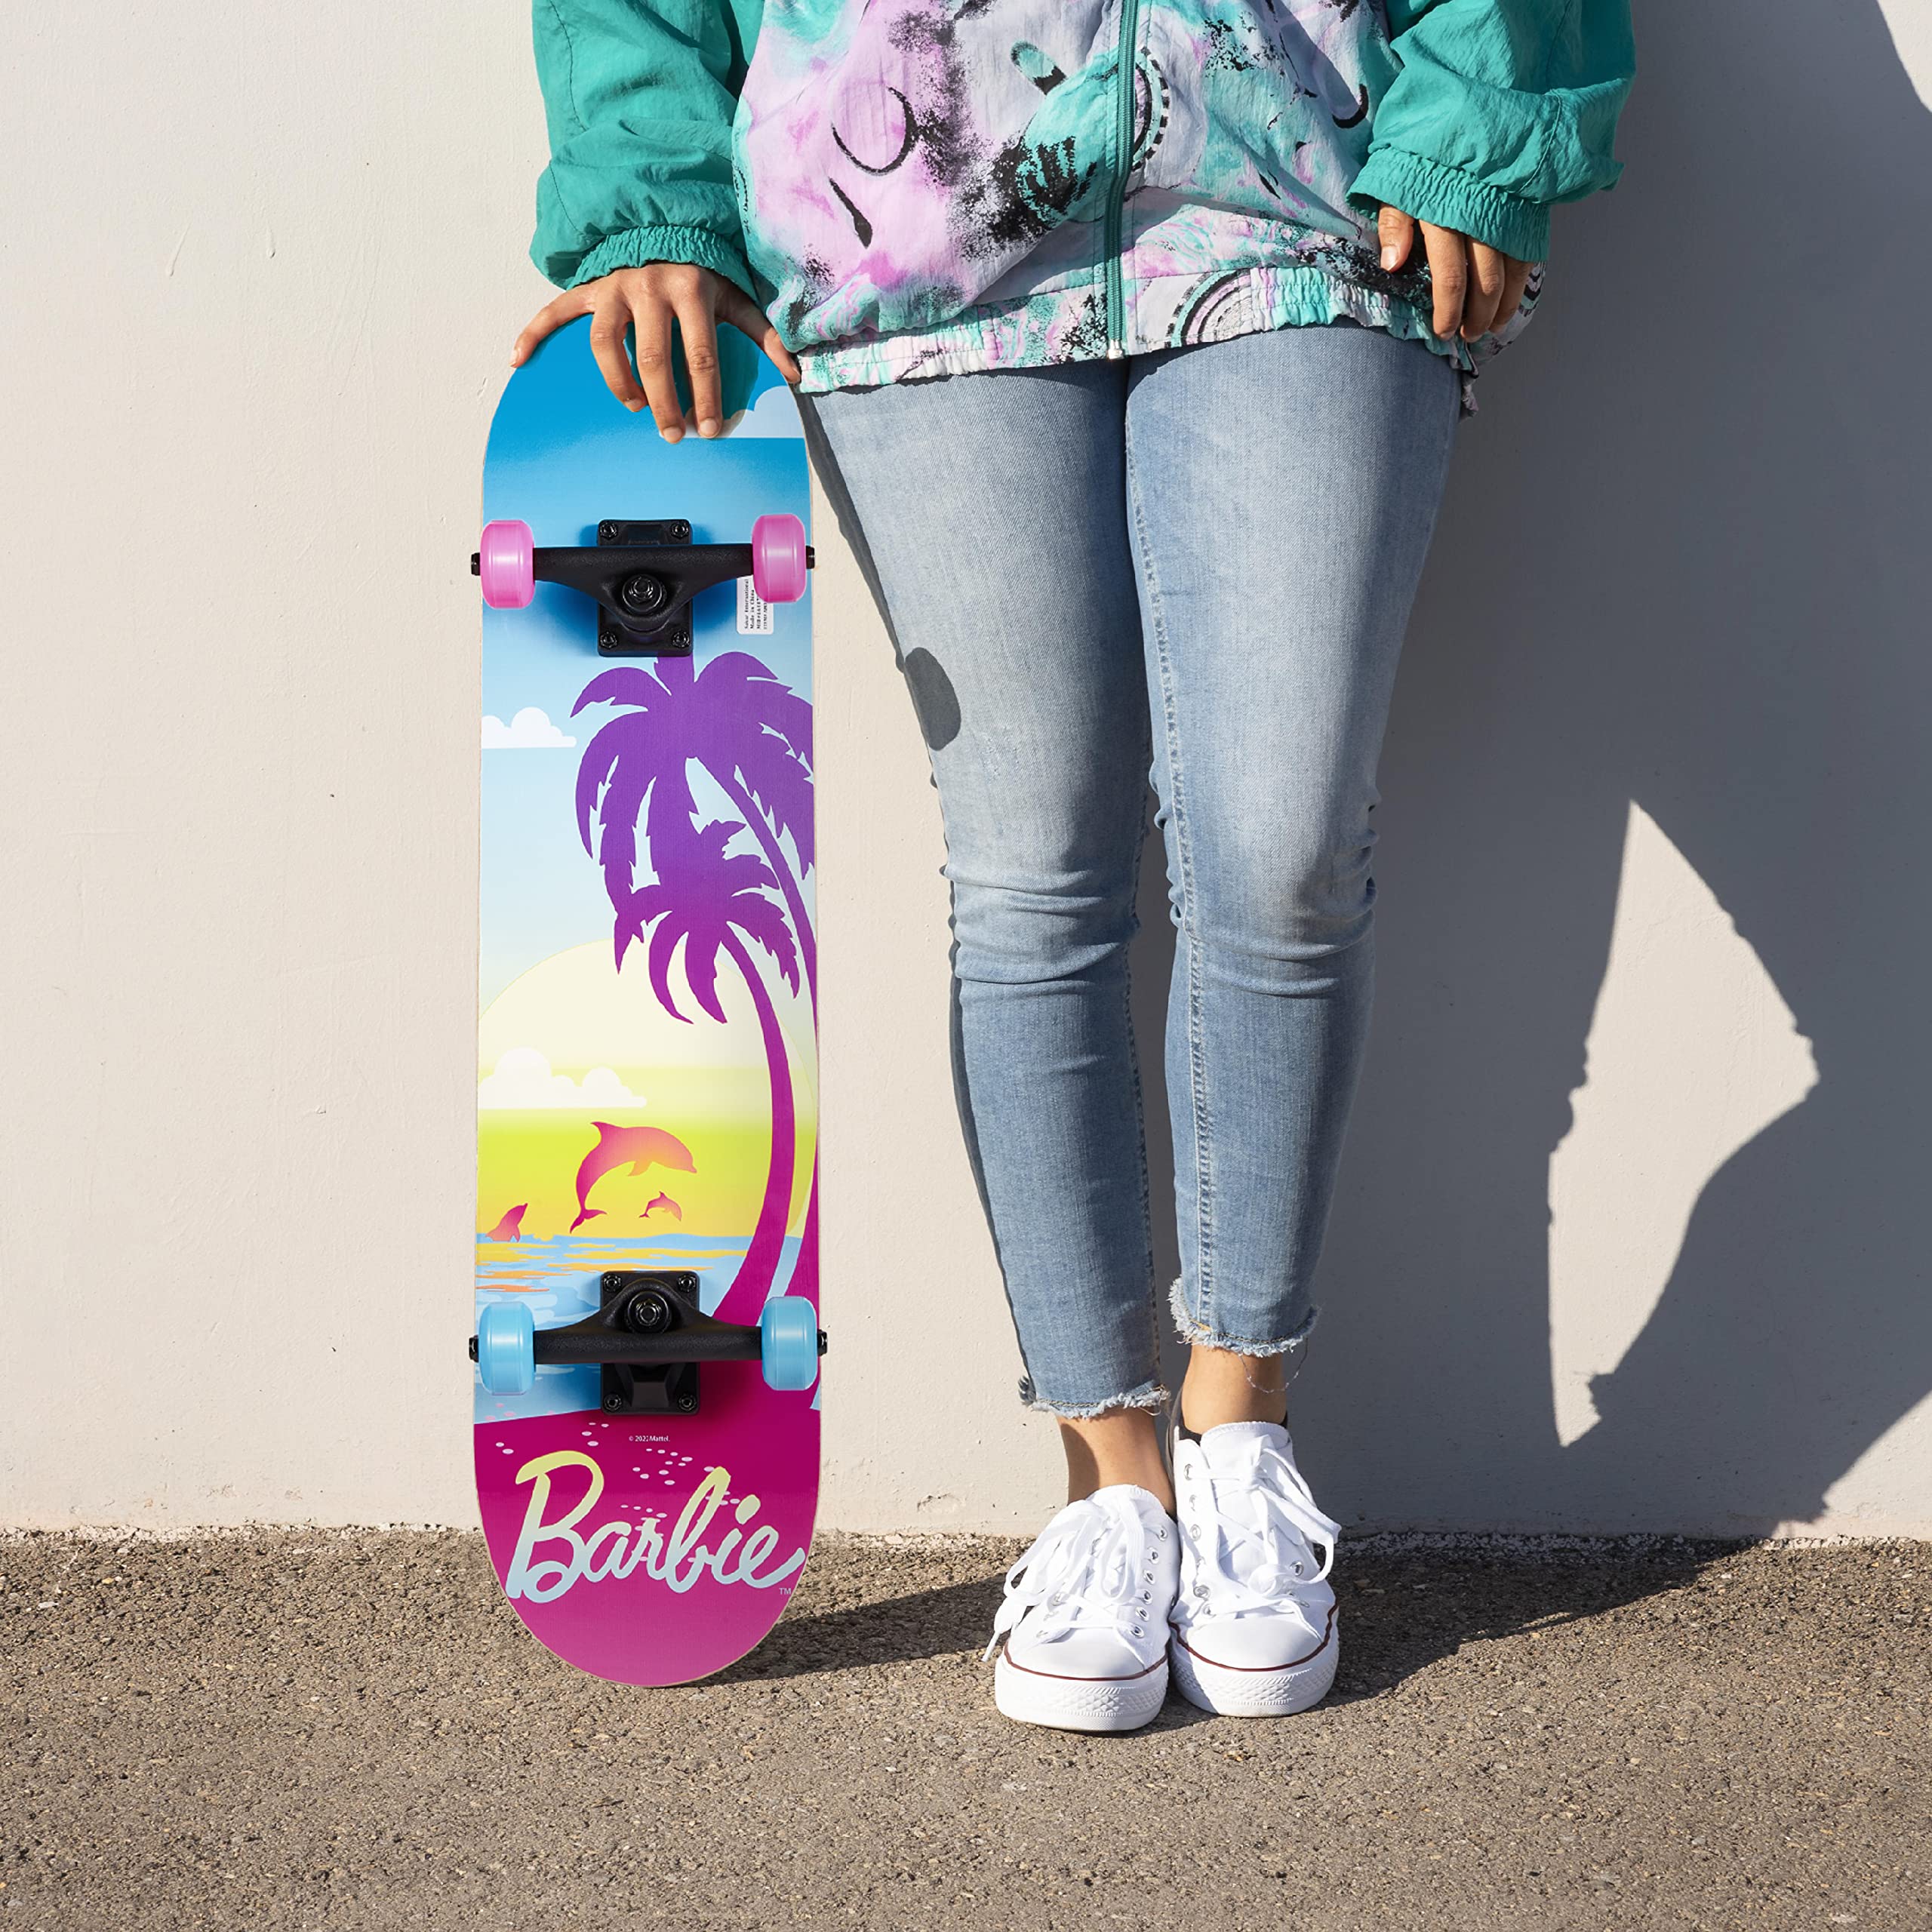 Barbie Skateboard with Printed Graphic Grip Tape - Great for Kids and Teens, Cruiser Skateboard with ABEC 5 Bearings, Durable Deck, Smooth Wheels